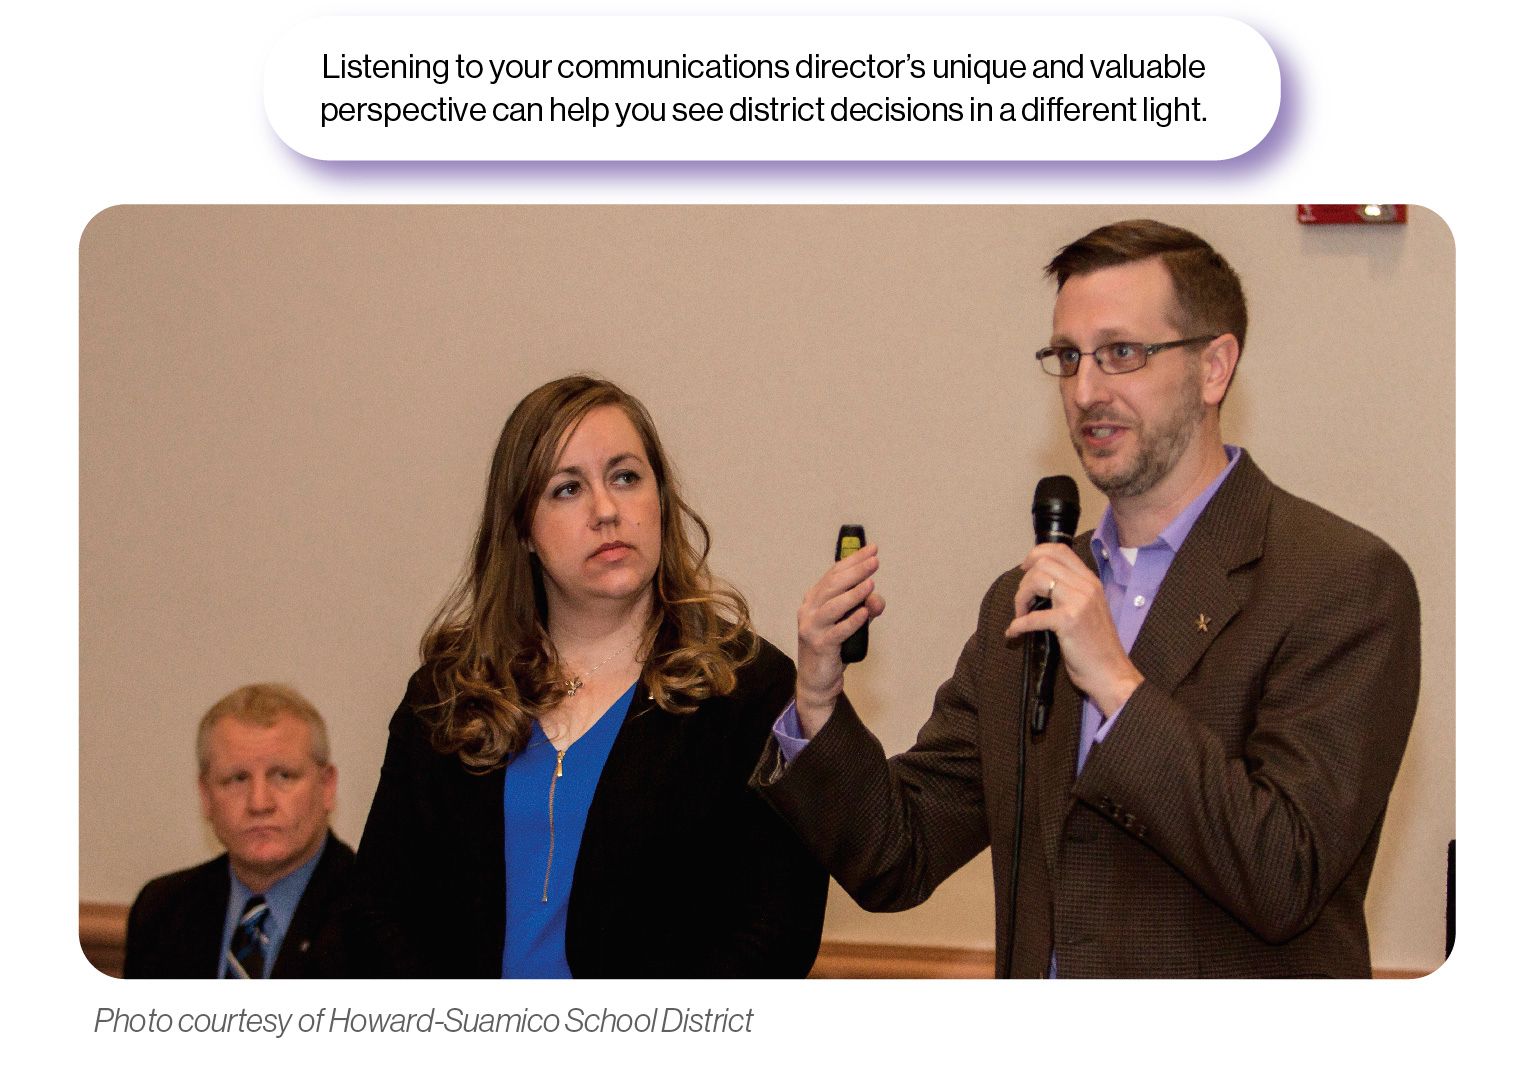 Image: Brian Nicol, Howard-Suamico School District's Director of Communications, presenting at a meeting with the SchoolCEO caption 'Listening to your communications director's unique and valuable perspective can help you see district decisions in a different light.'